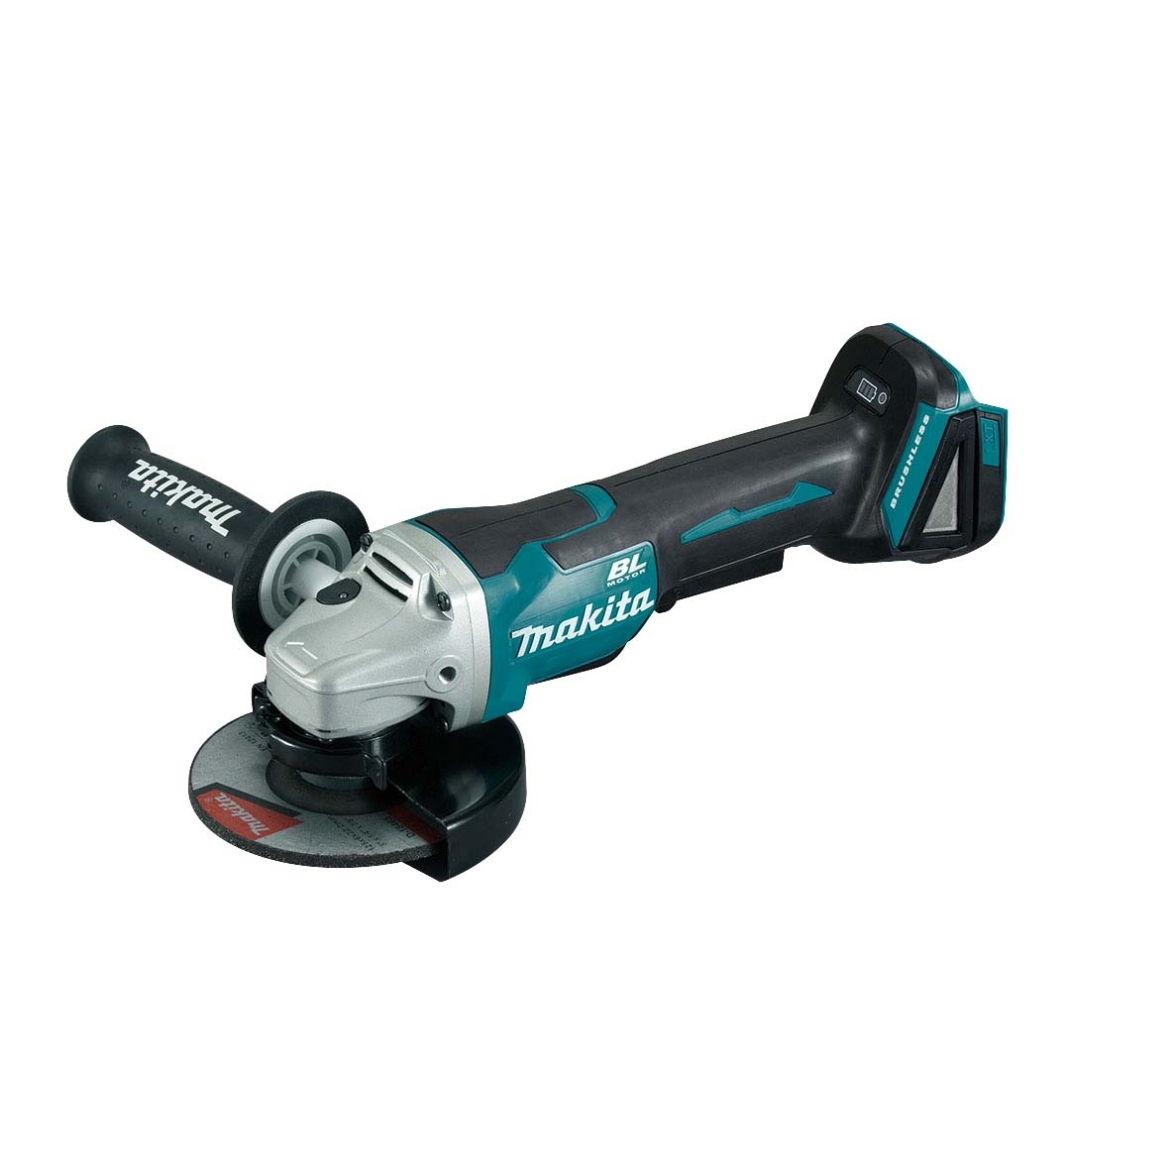 Picture of 18V BRUSHLESS 125mm Angle Grinder, Paddle Switch, Kick Back Detection - Tool Only